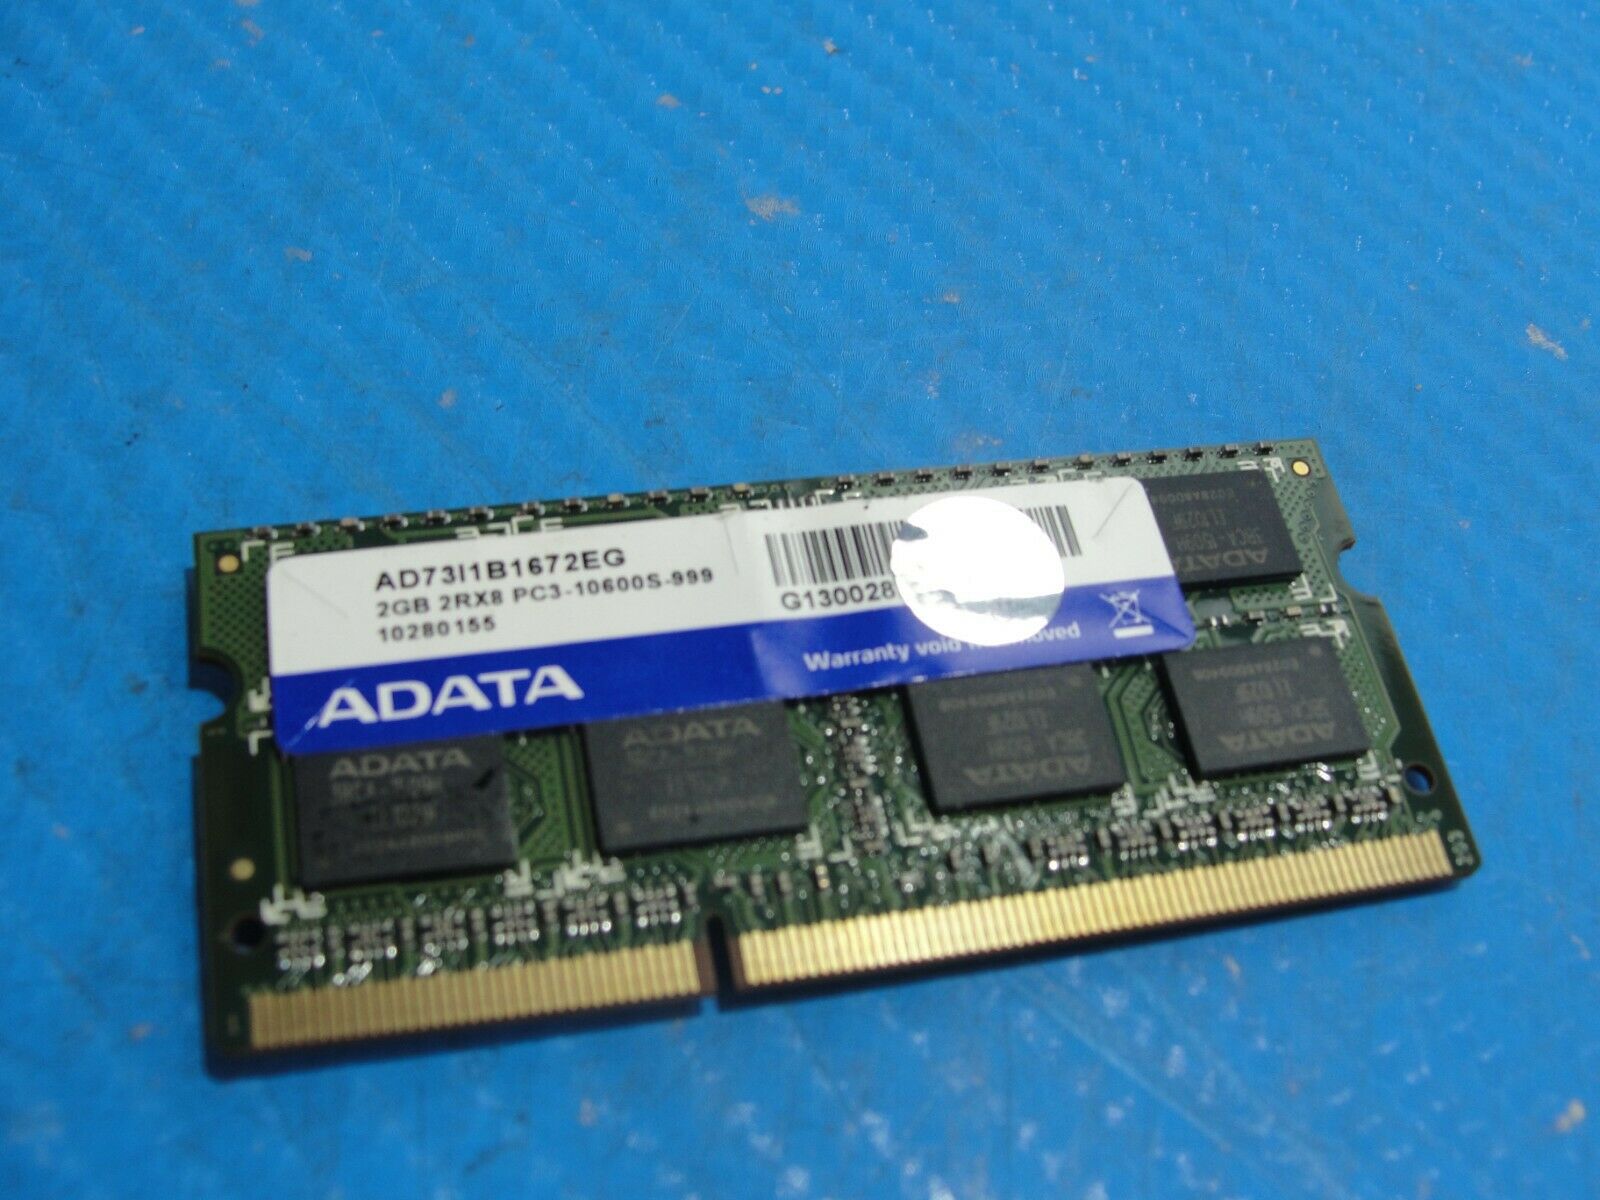 Asus G73JW ADATA 2GB 2RX8 SO-DIMM Memory RAM PC3-10600S AD73I1B1672EG - Laptop Parts - Buy Authentic Computer Parts - Top Seller Ebay